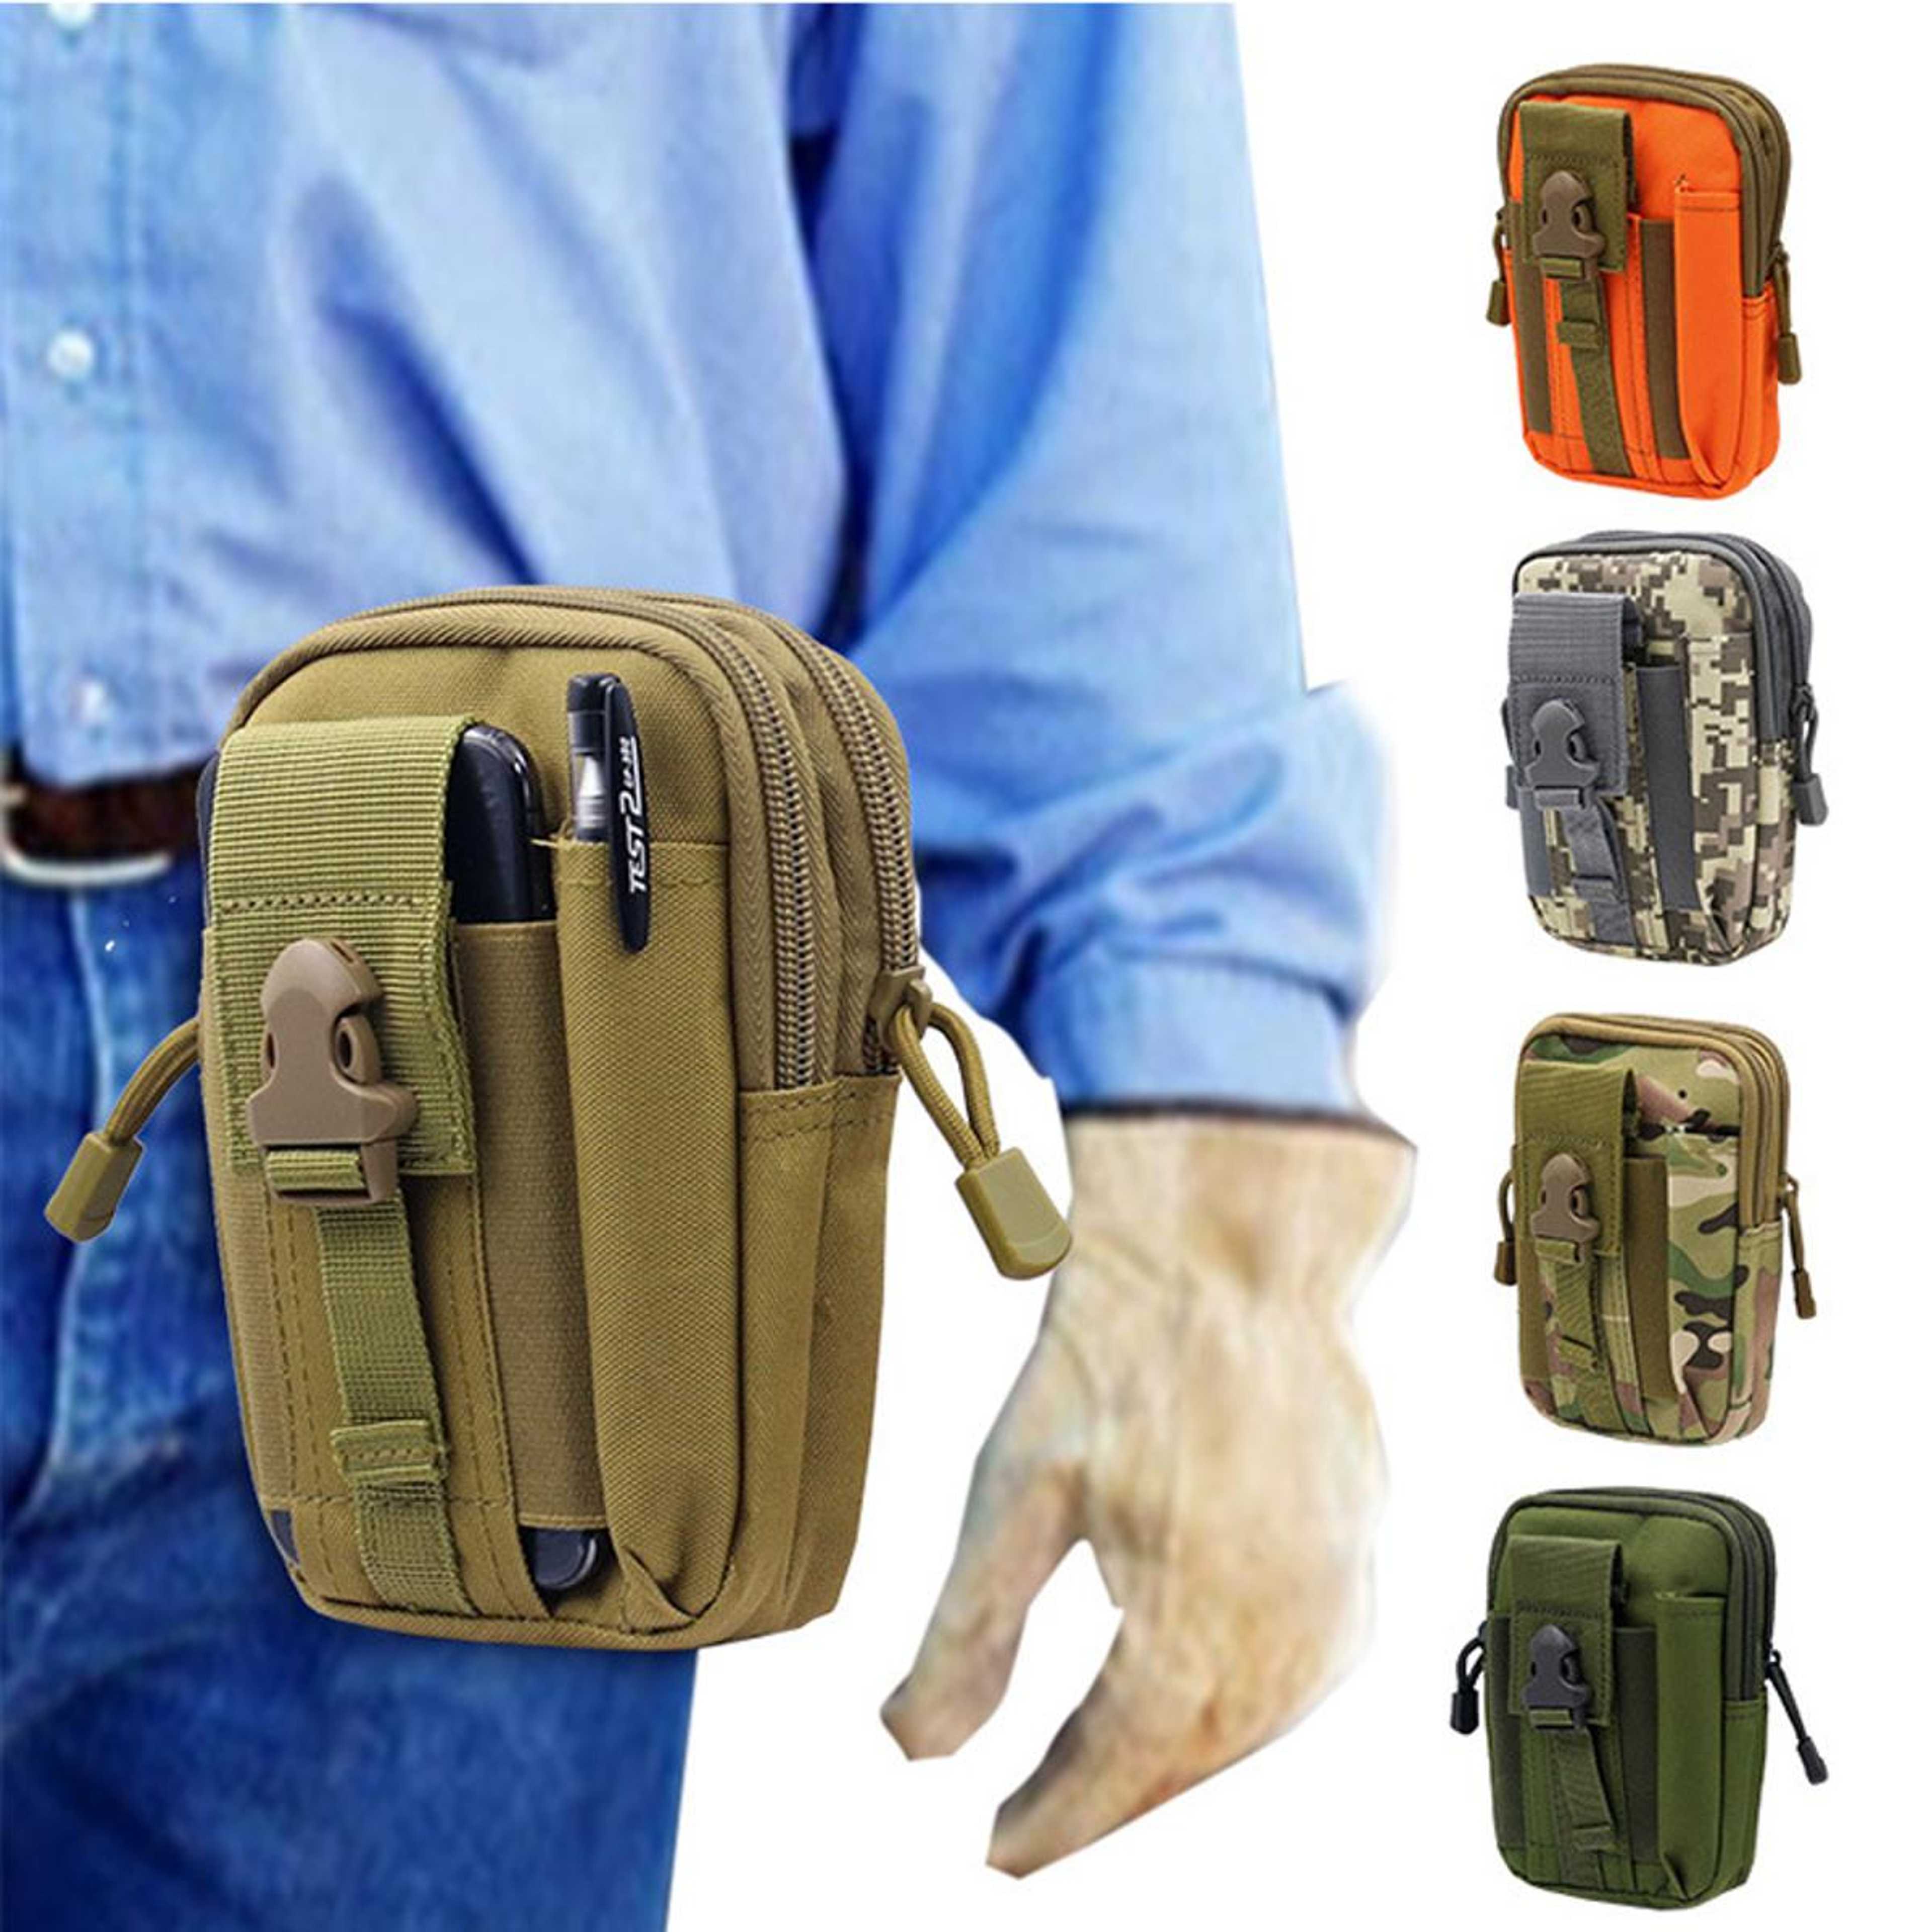 Men Tactical Pouch Belt Waist Pack Bag Small Pocket Military Waist Pack Running Pouch Travel Camping Bags Outdoor Tool